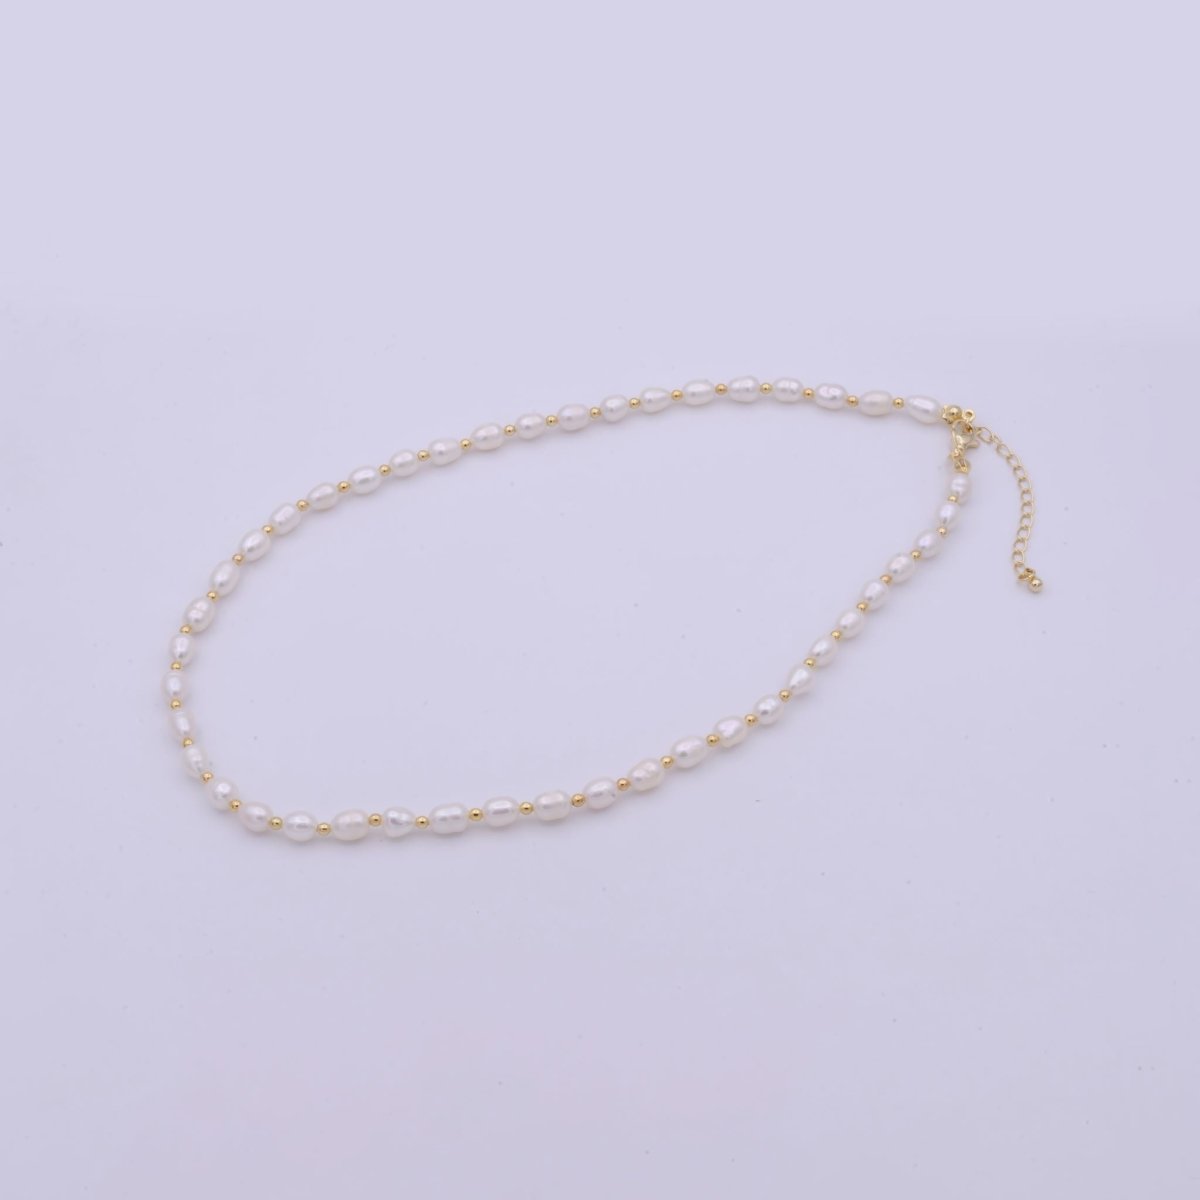 Freshwater Pearl Choker Necklace | Small Dainty Pearl Necklace 16.5 inch + 2 inch extender | WA-509 - DLUXCA